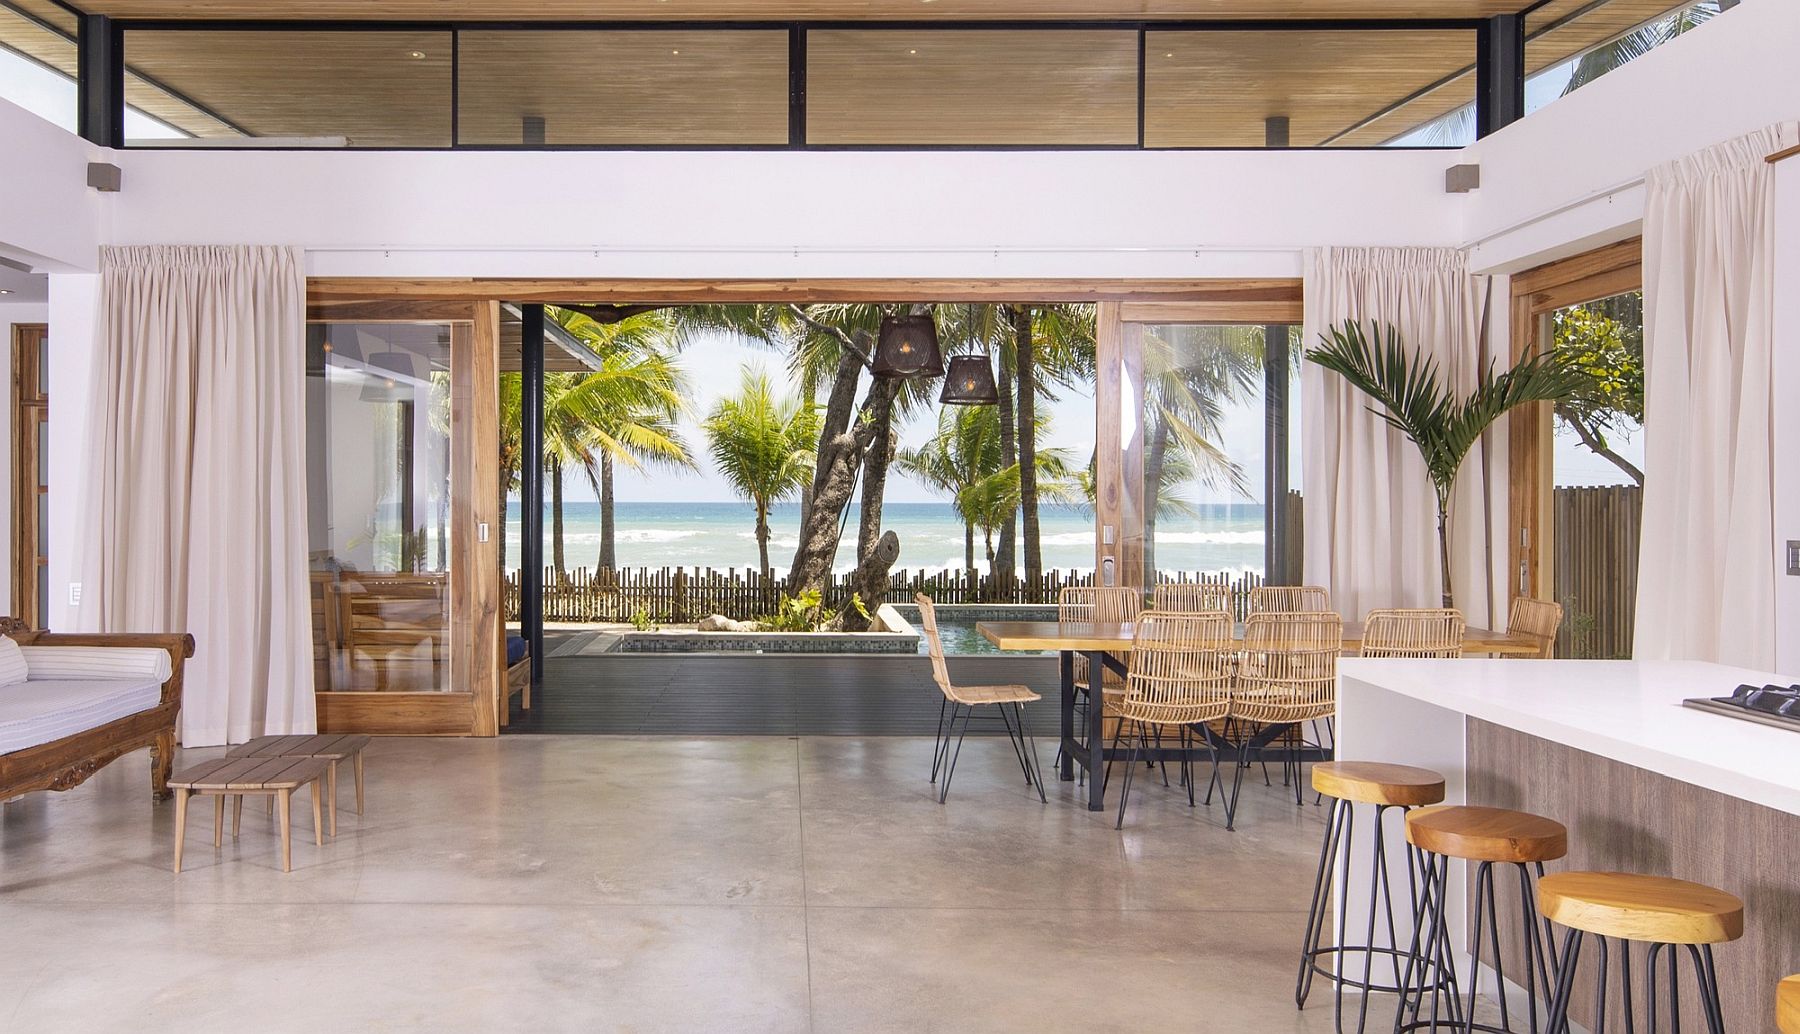 Sliding glass doors open completely to bring the beach indoors